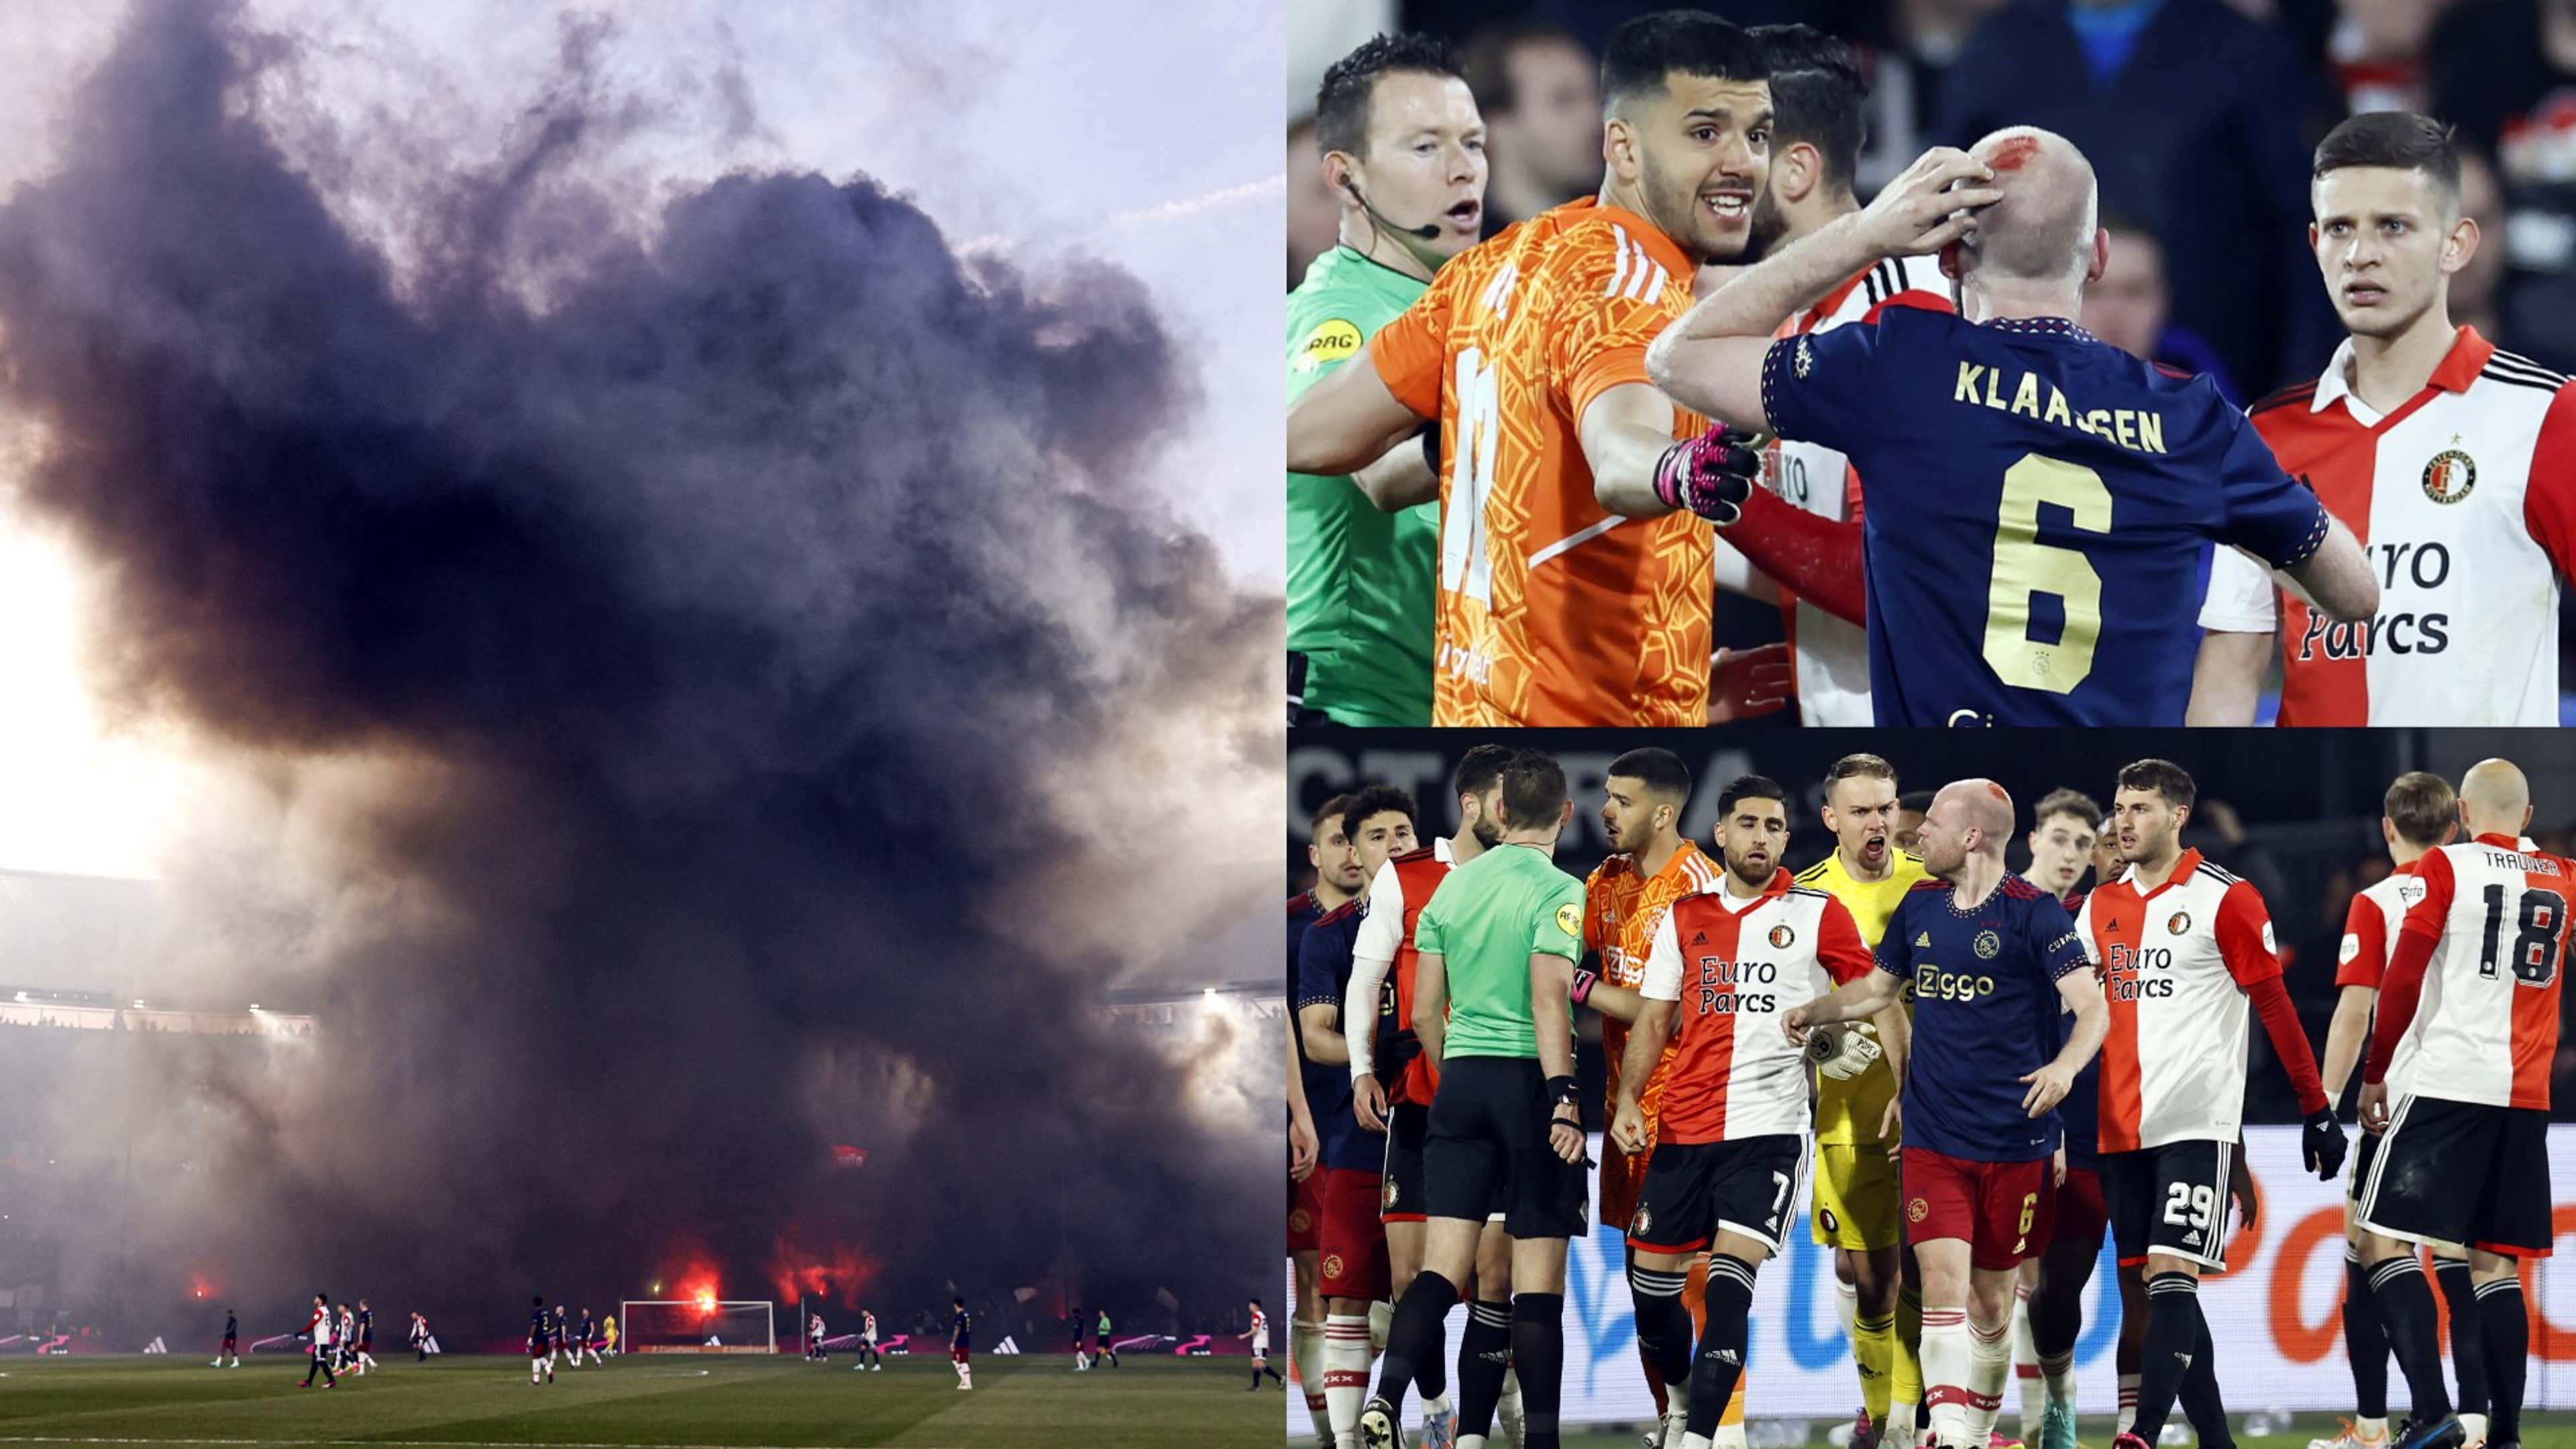 smog eindpunt Trouw KNVB announces stricter rules for fans after 'outrageous incident' in which  Ajax's Davy Klaassen bloodied by projectile | Goal.com US